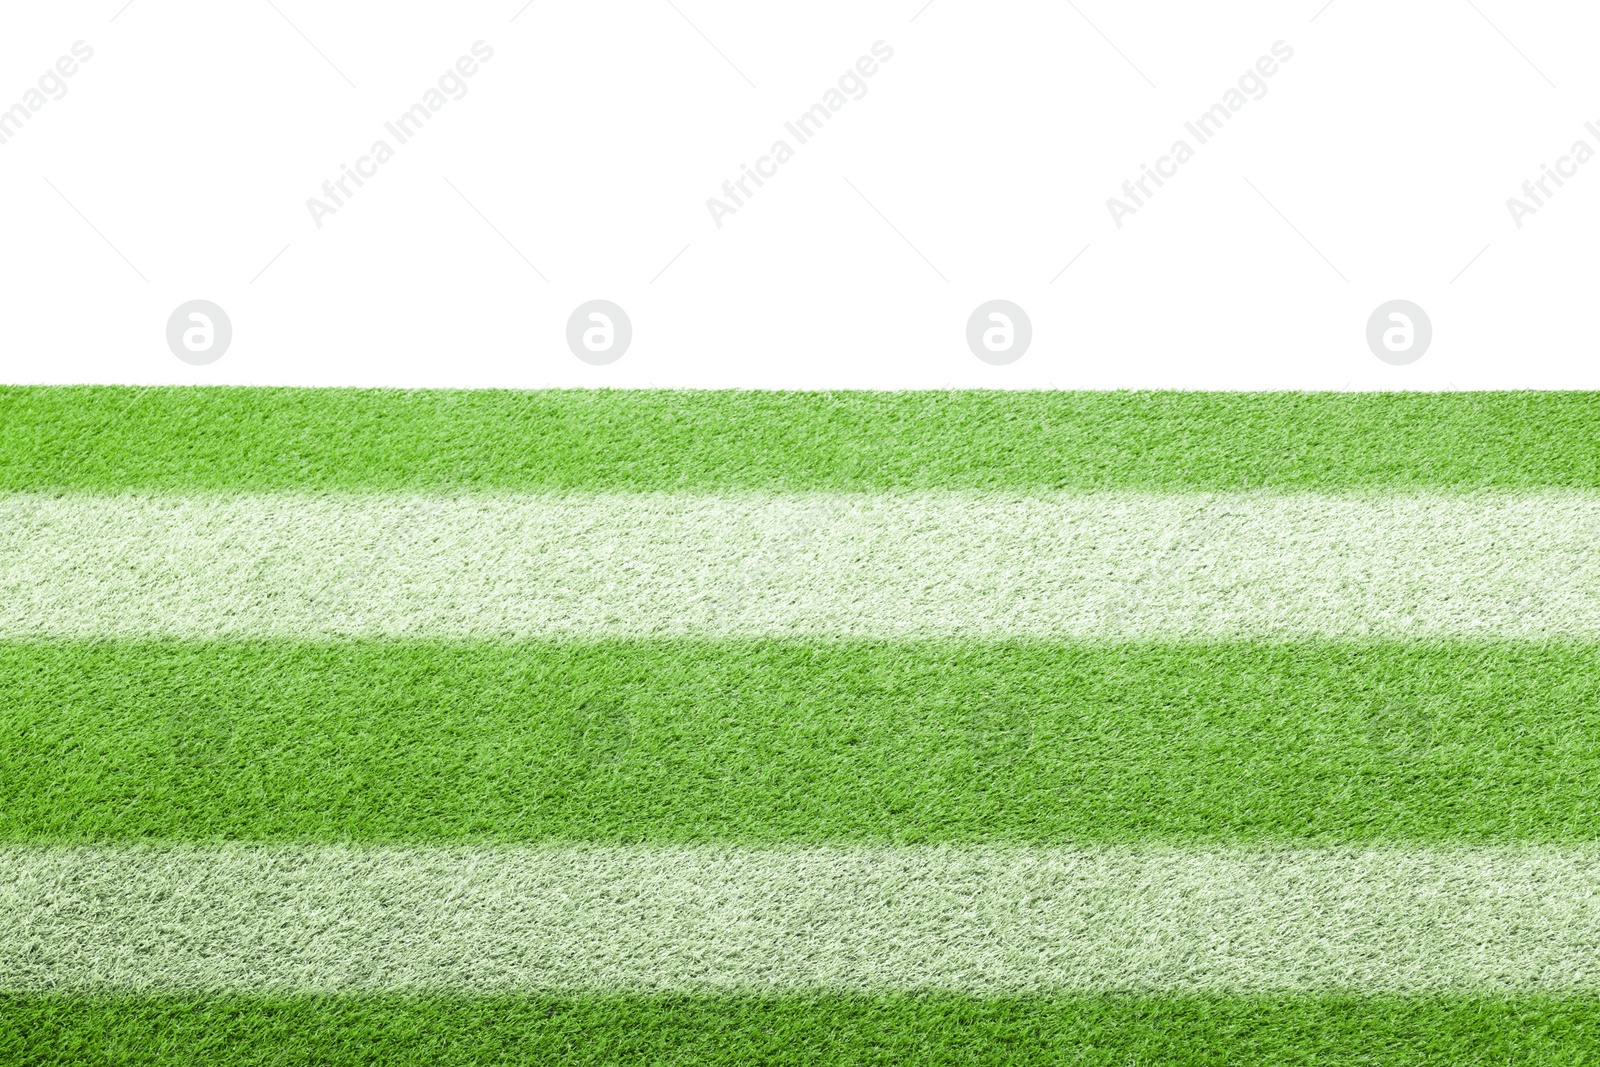 Image of Green grass with markings on white background